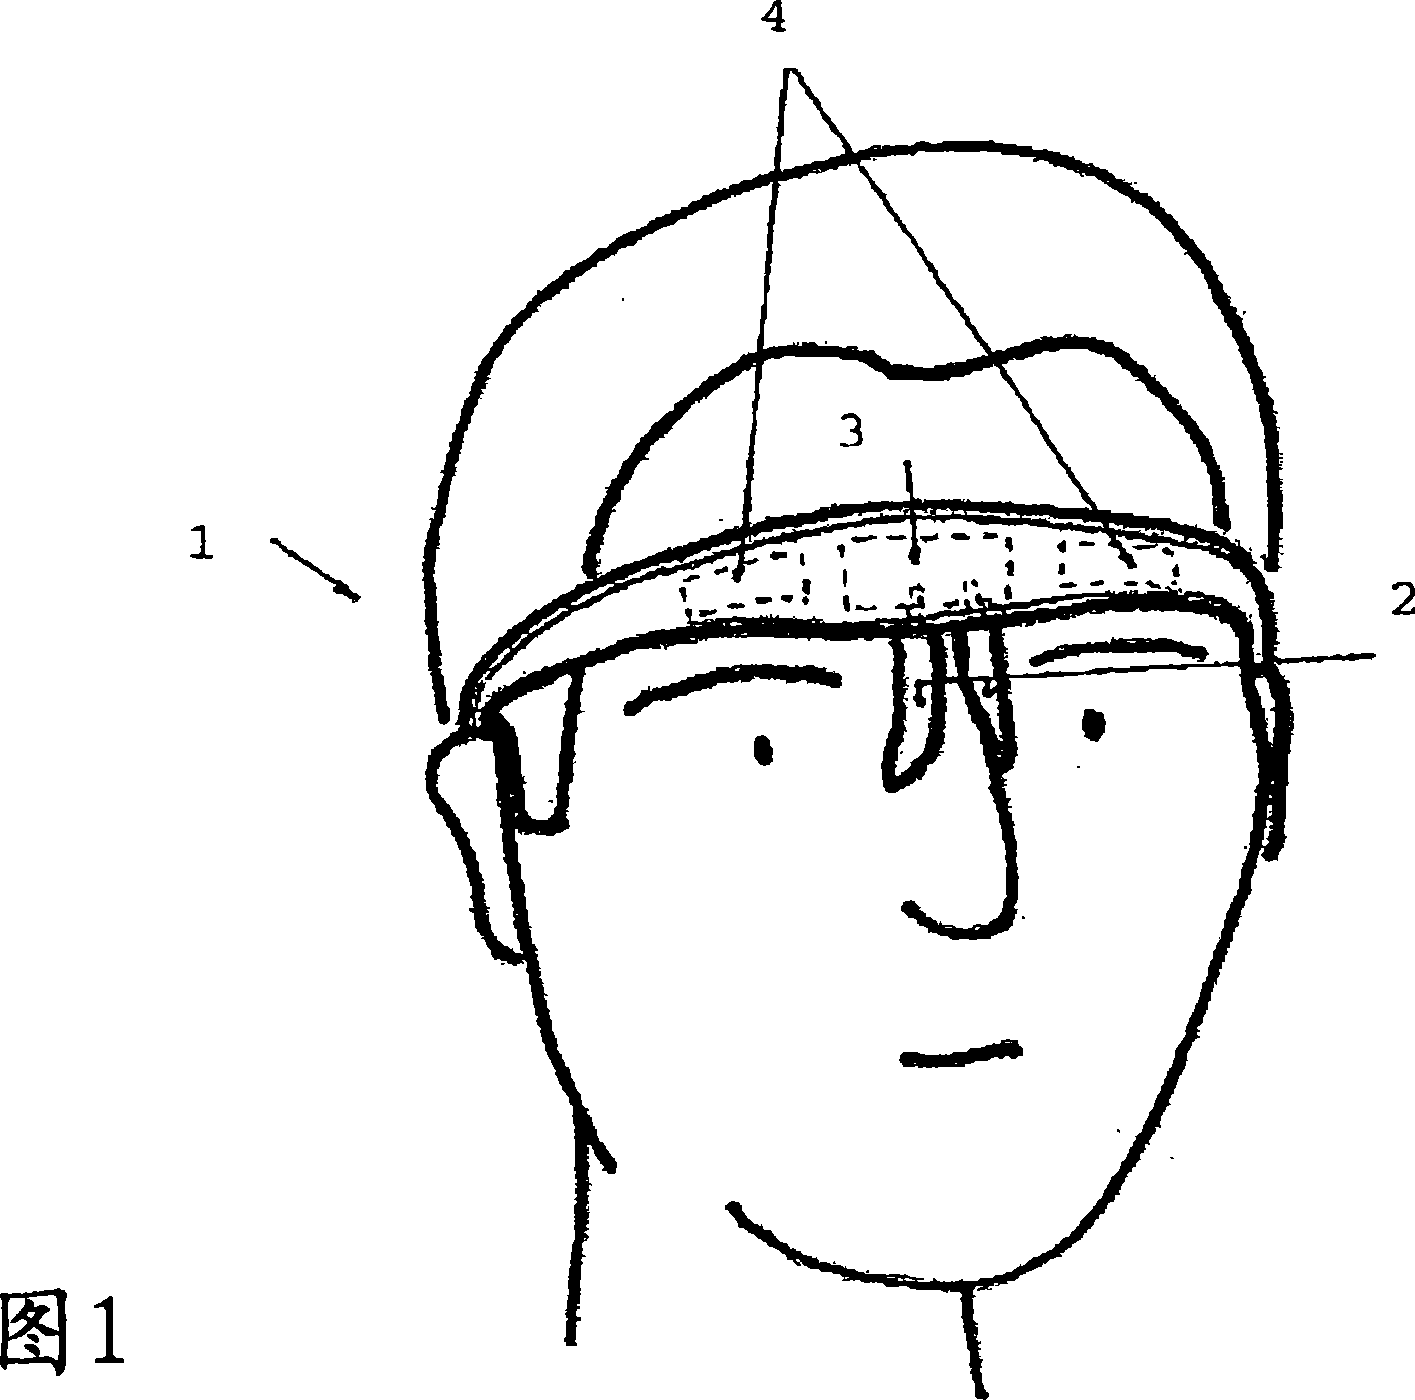 Apparatus for electrically inhibiting facial muscles